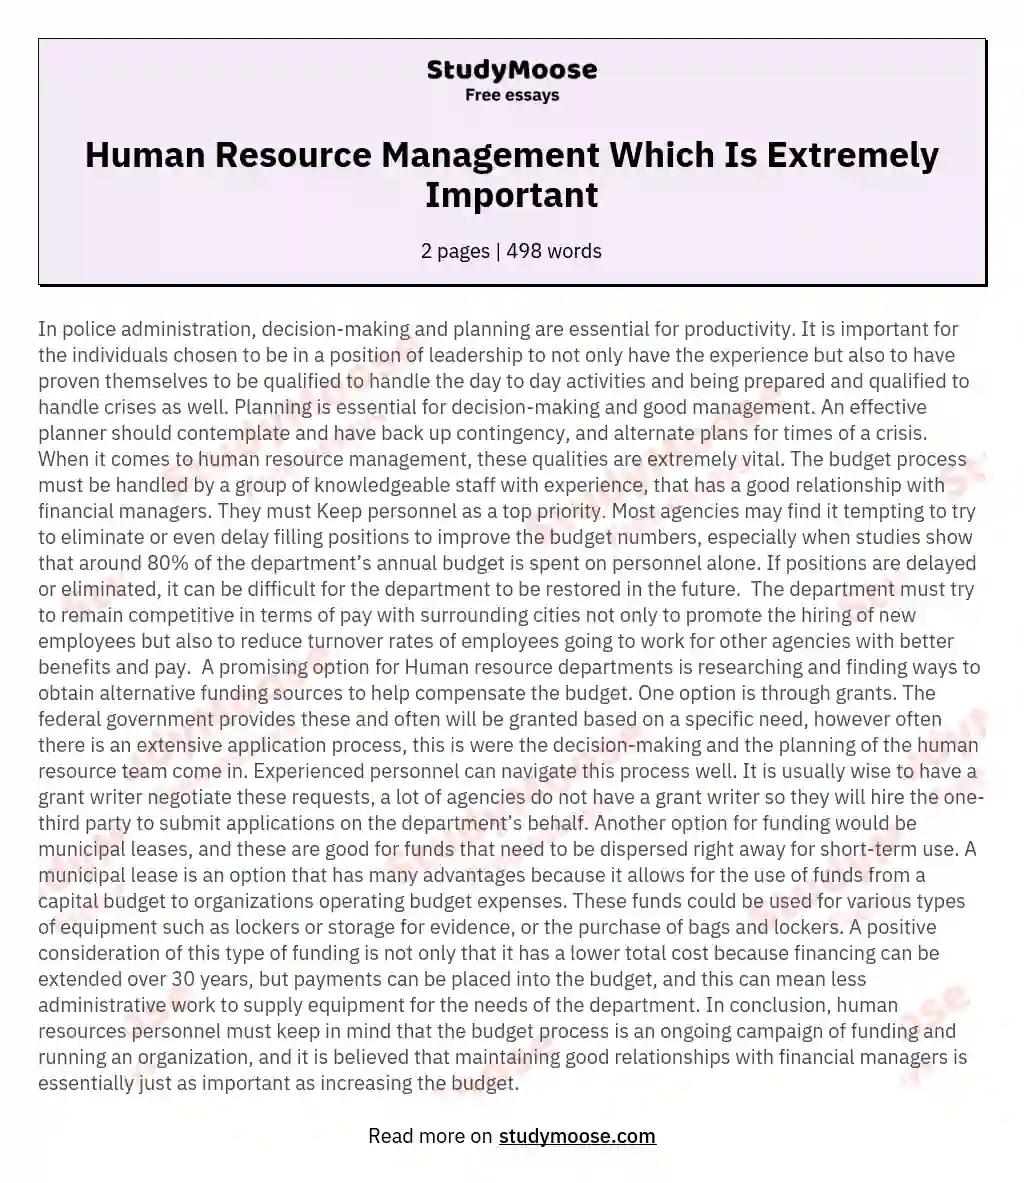 Human Resource Management Which Is Extremely Important essay